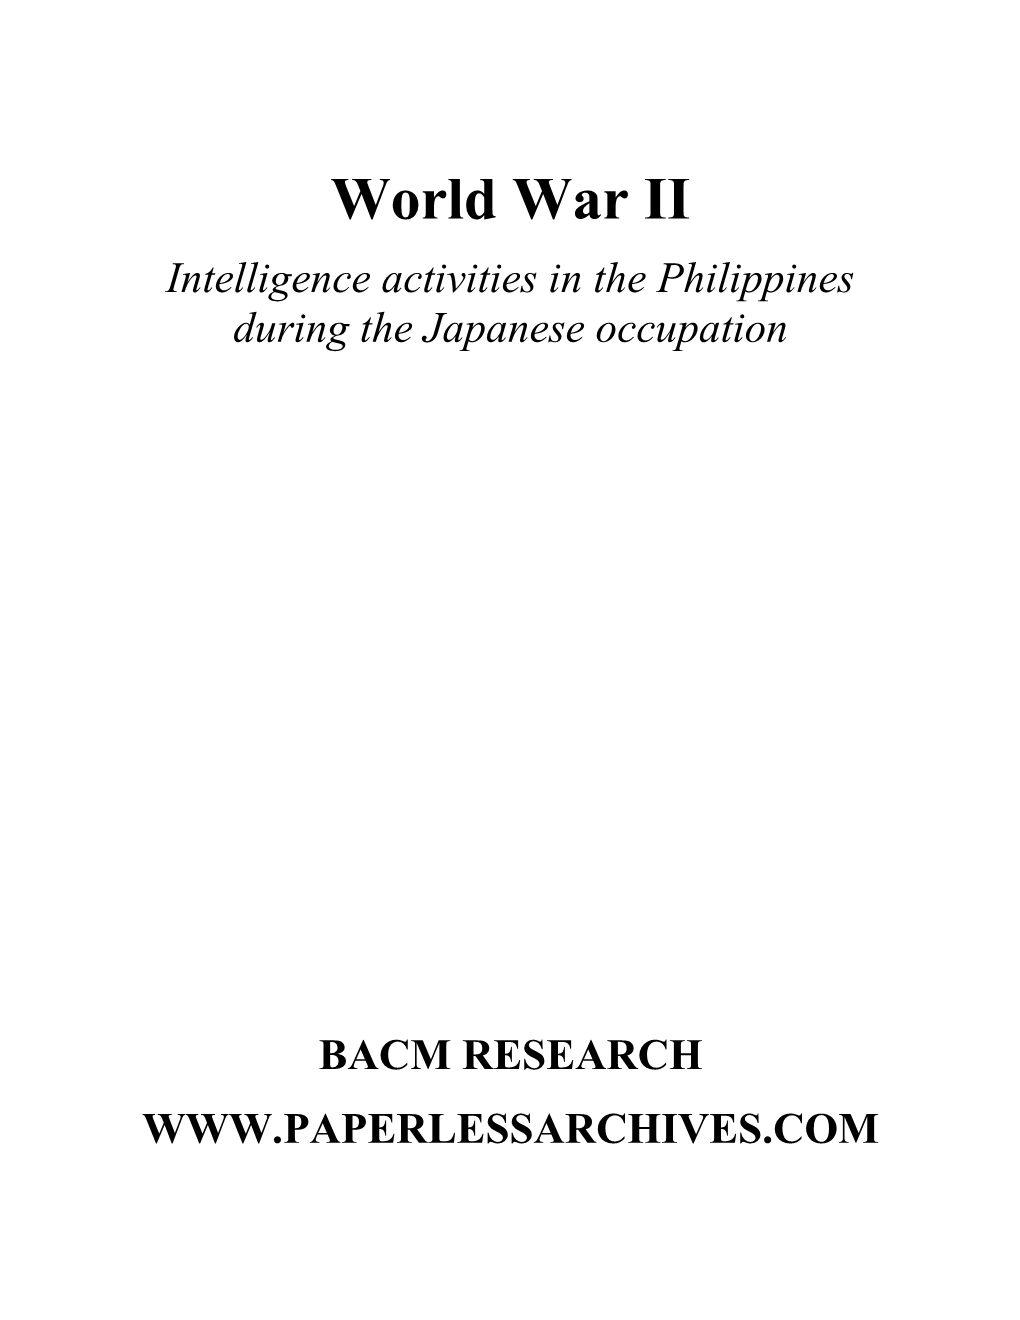 World War II: Intelligence Activities in the Philippines During The